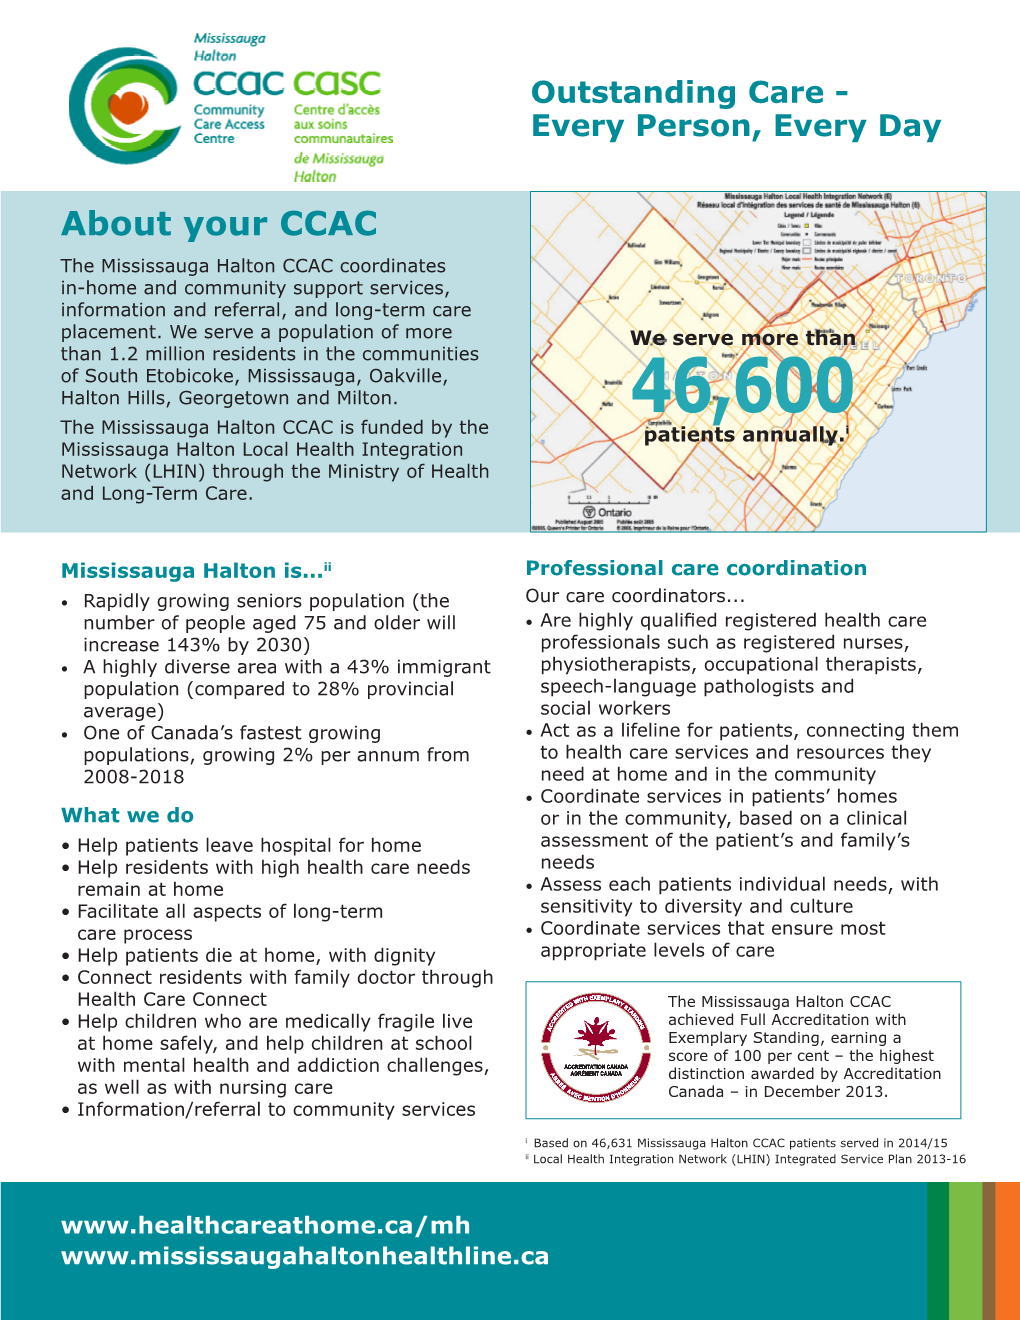 About Your CCAC the Mississauga Halton CCAC Coordinates In-Home and Community Support Services, Information and Referral, and Long-Term Care Placement